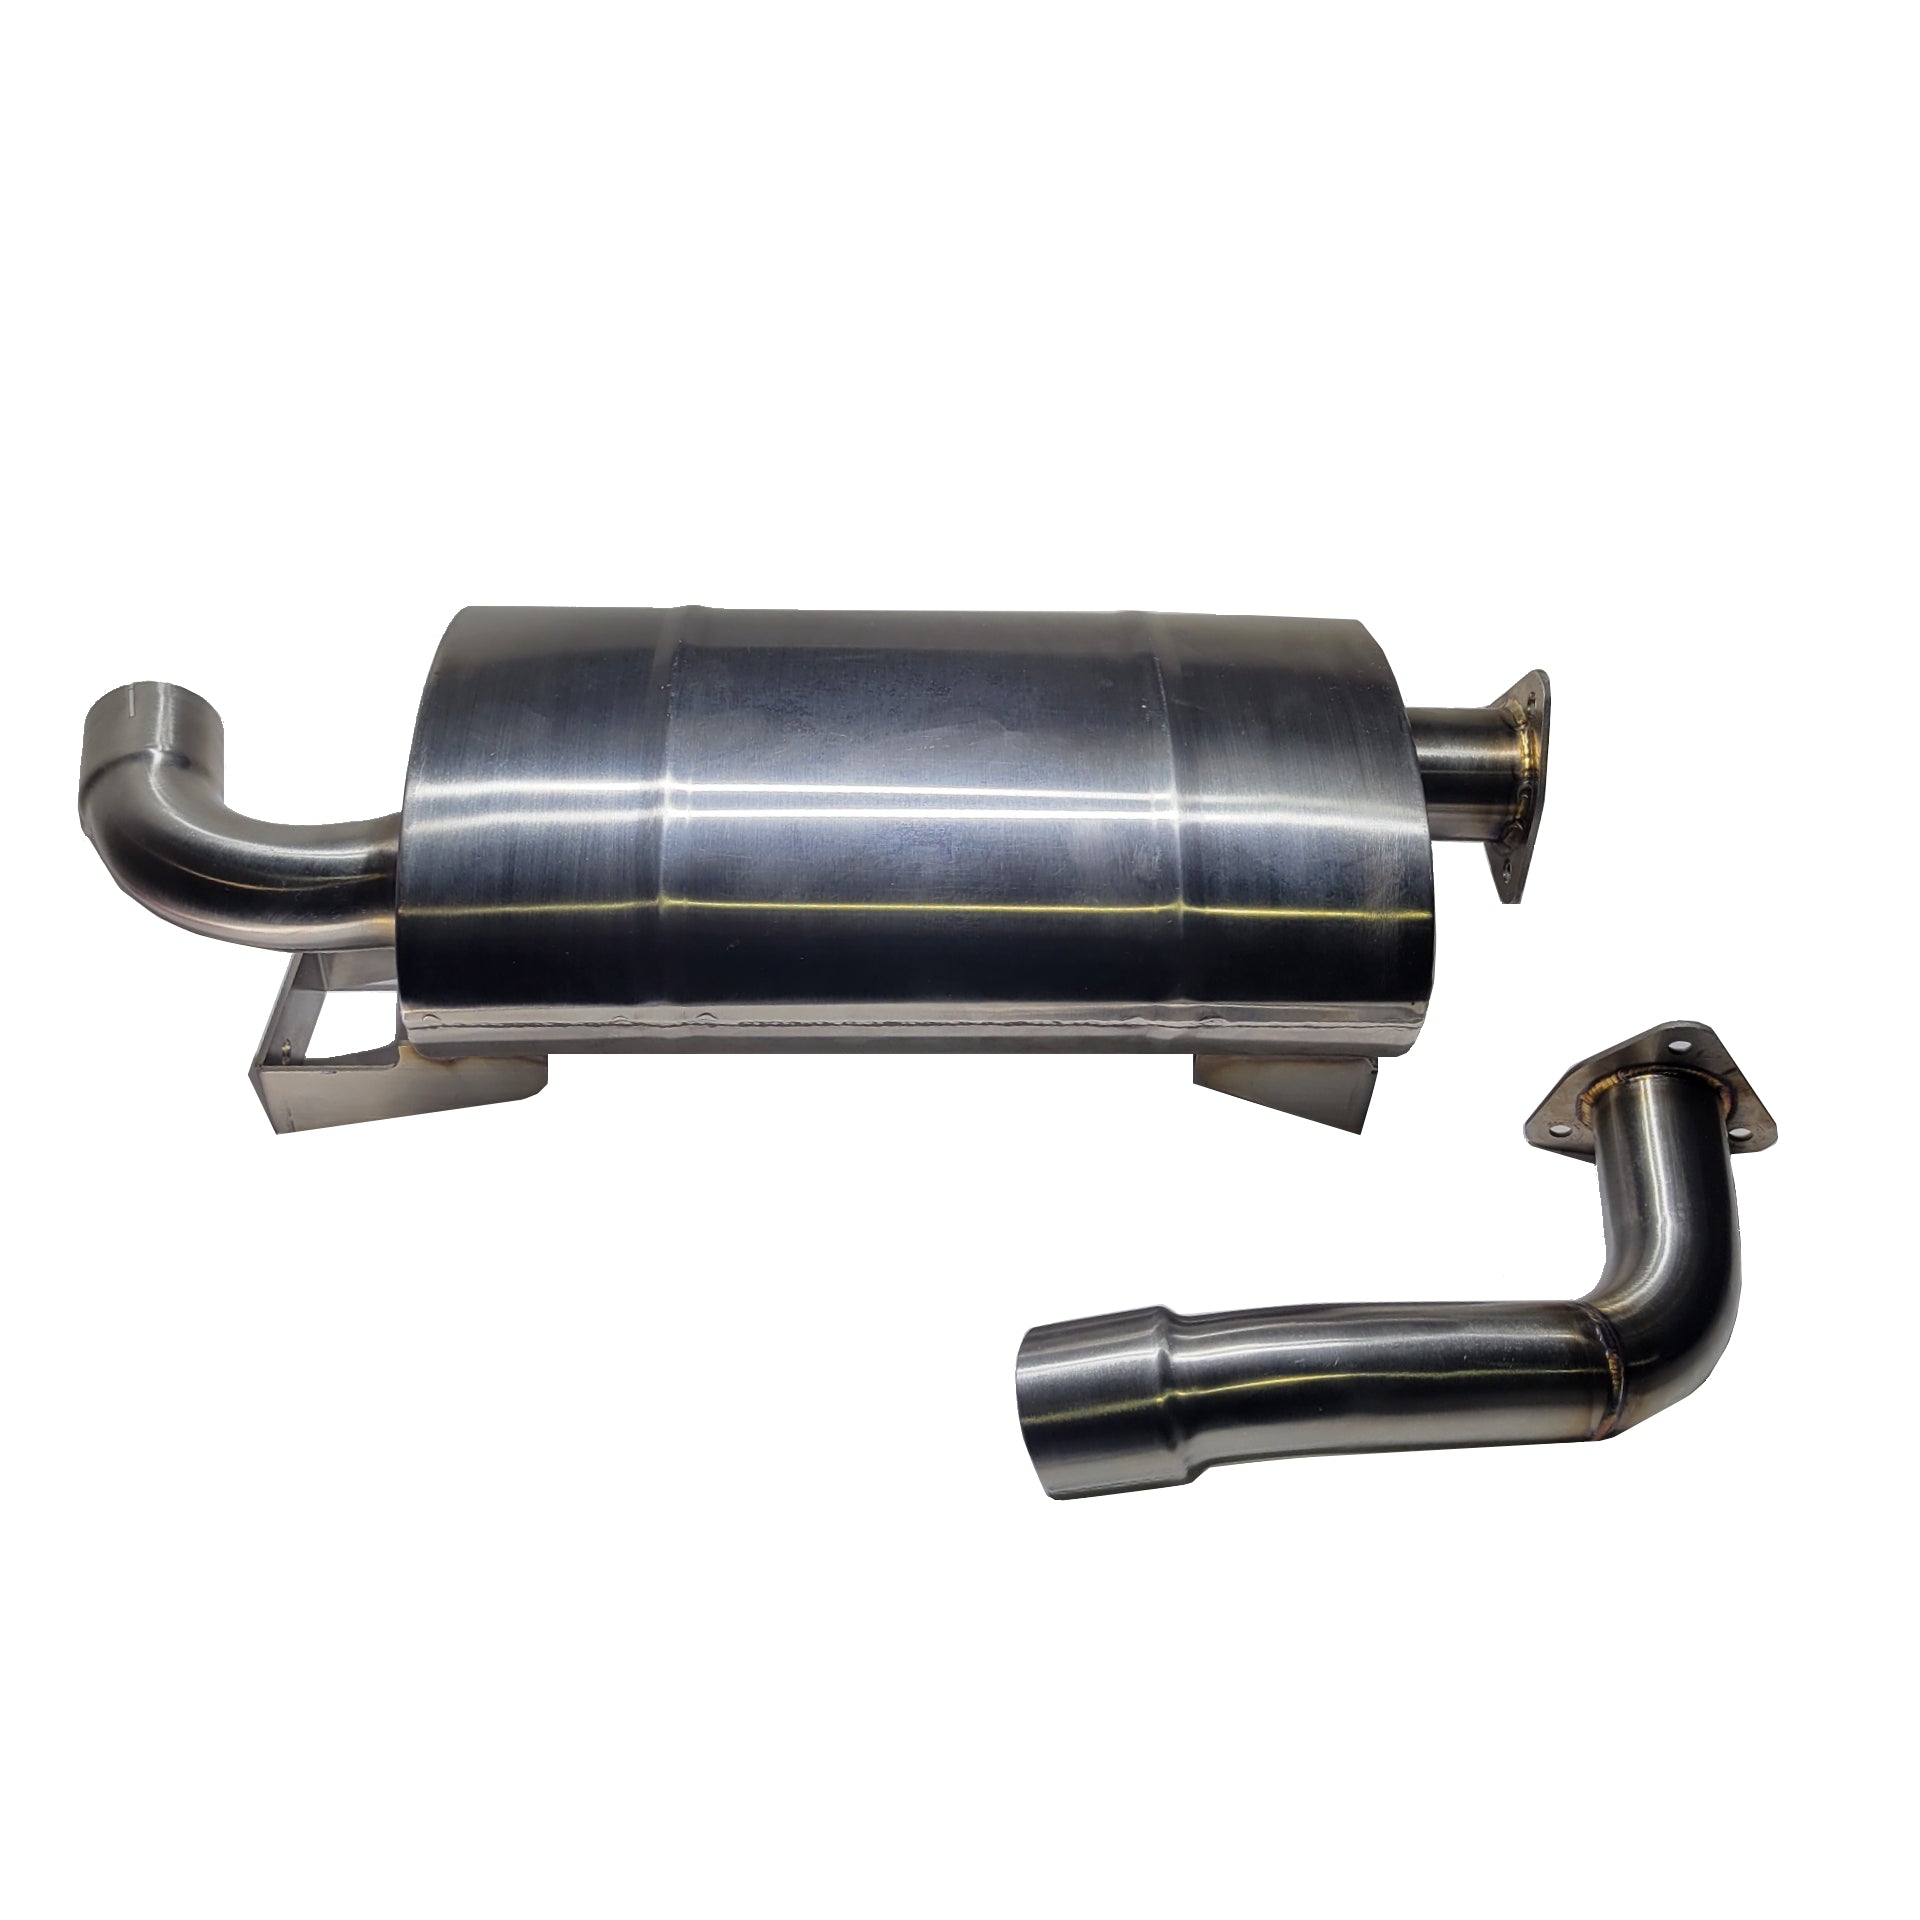 2020-2022 Can Am Defender 1000 Magnum Slip-On Exhaust